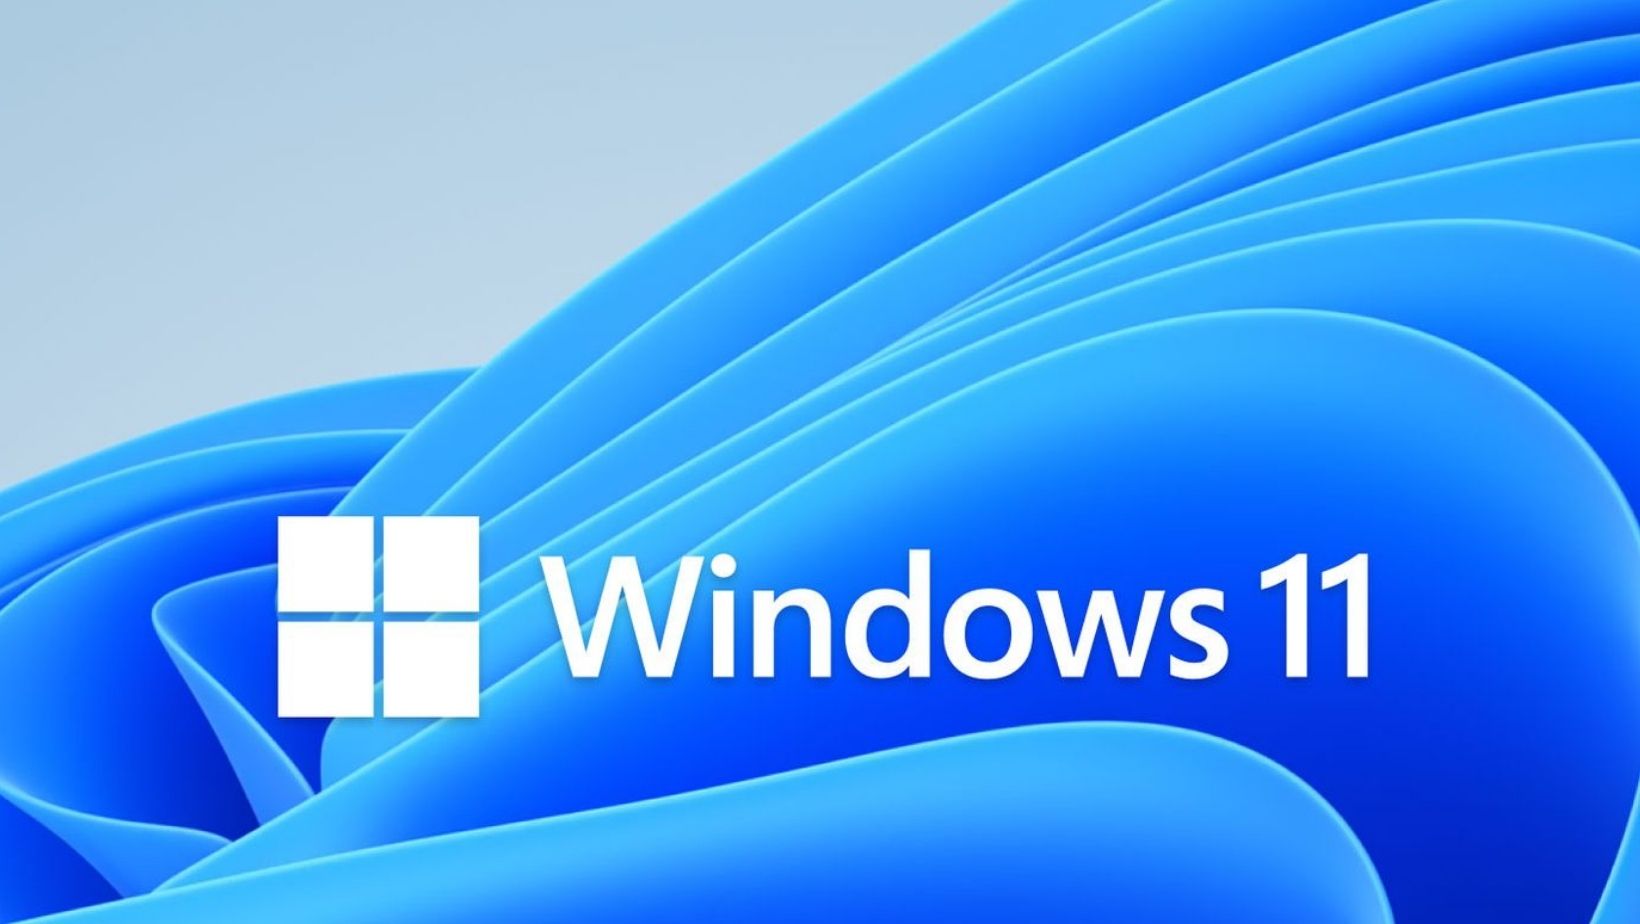 Upgrading to Windows 11? Ensure Your Device Meets the Minimum Requirements With This Guide